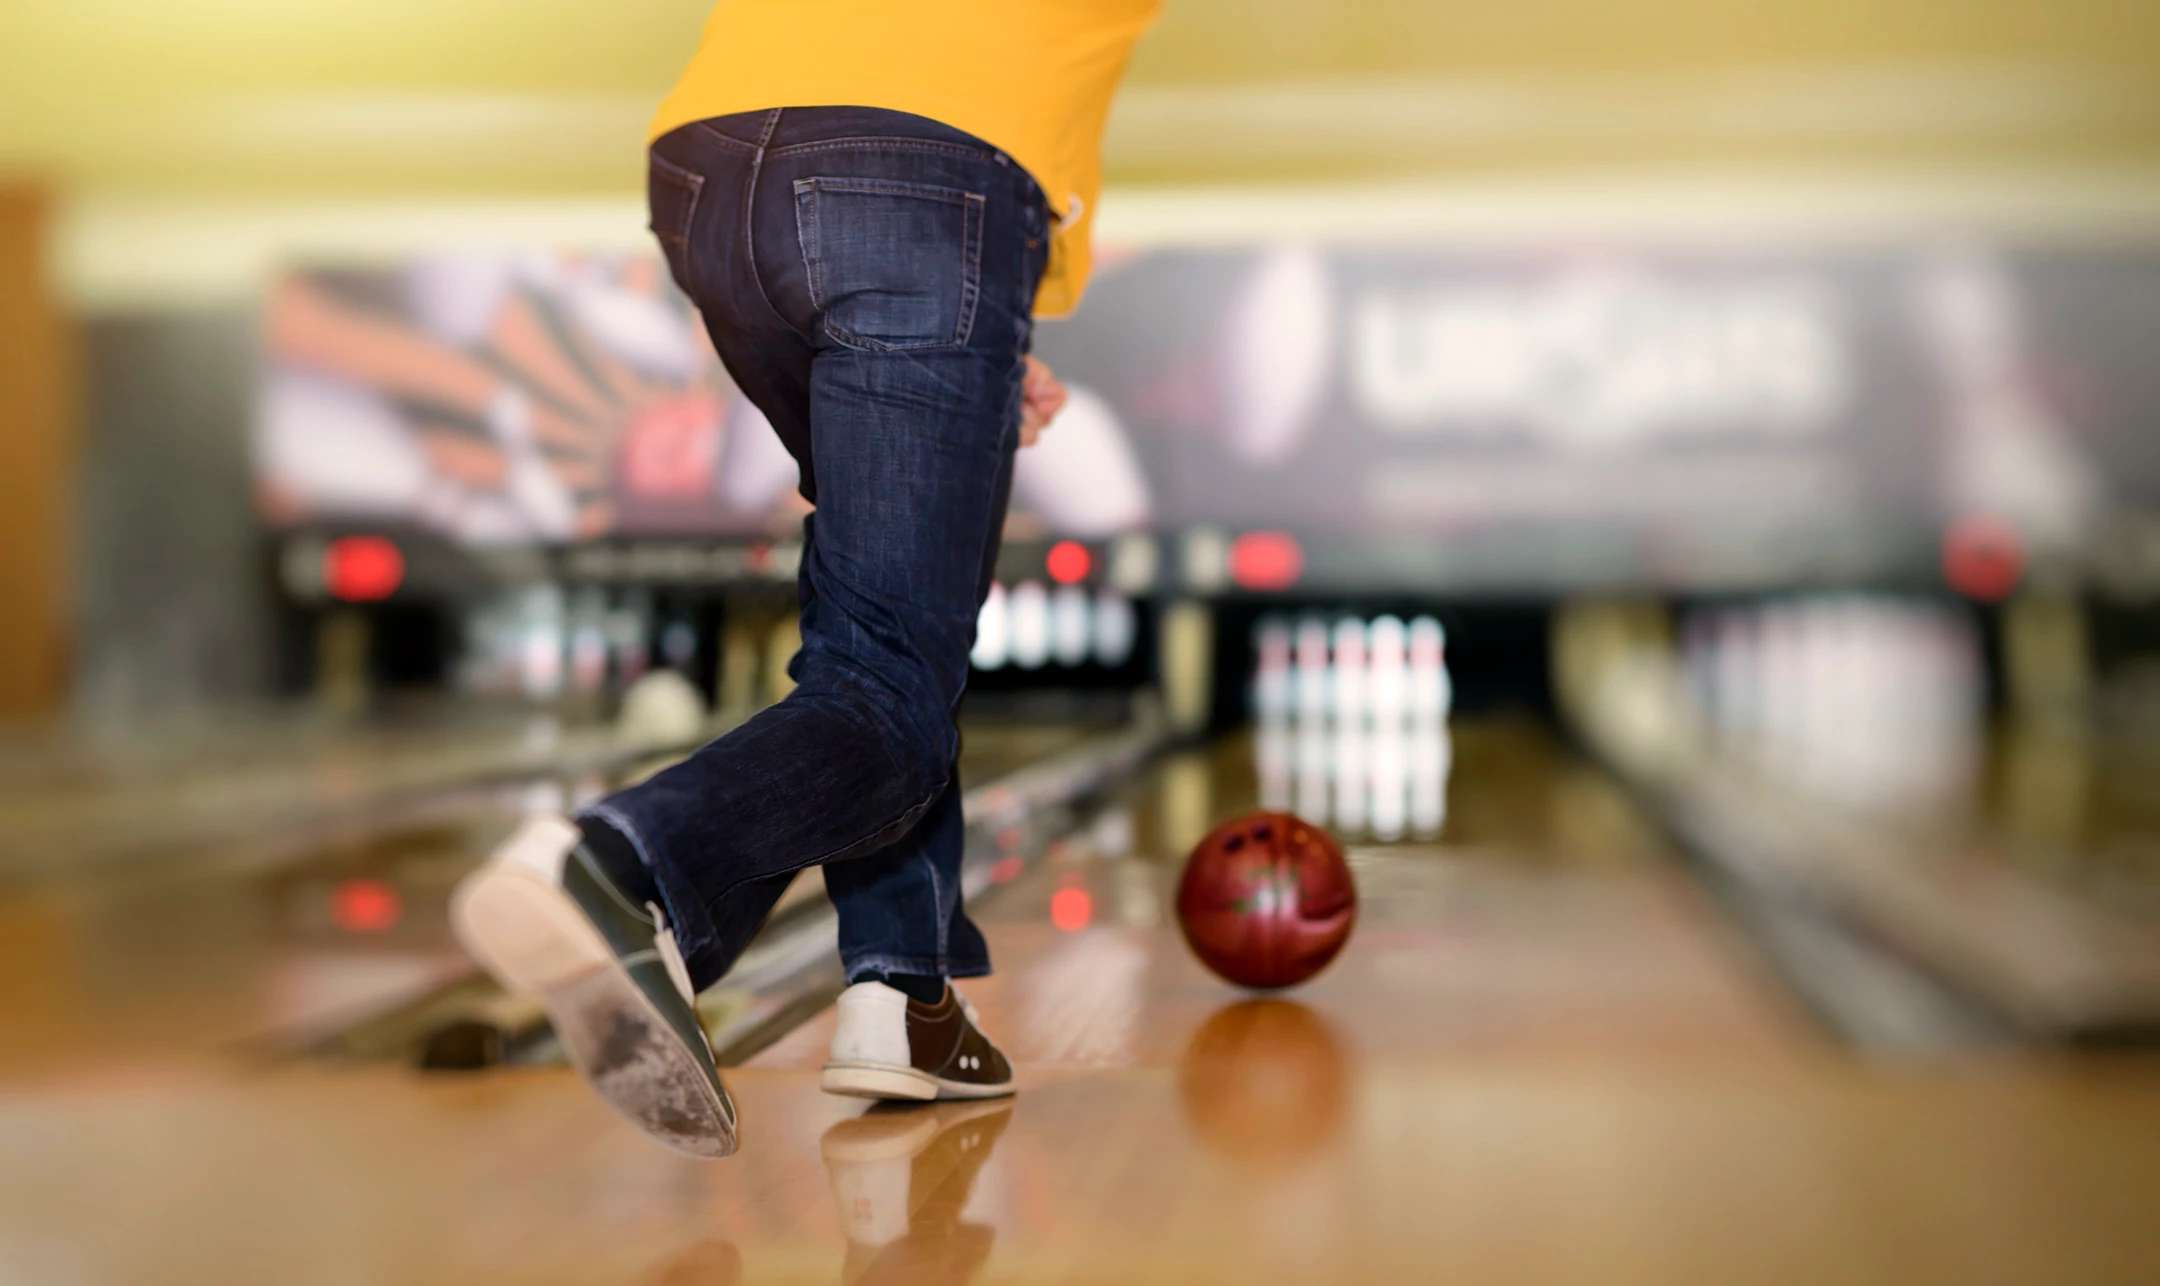 Image of person bowling